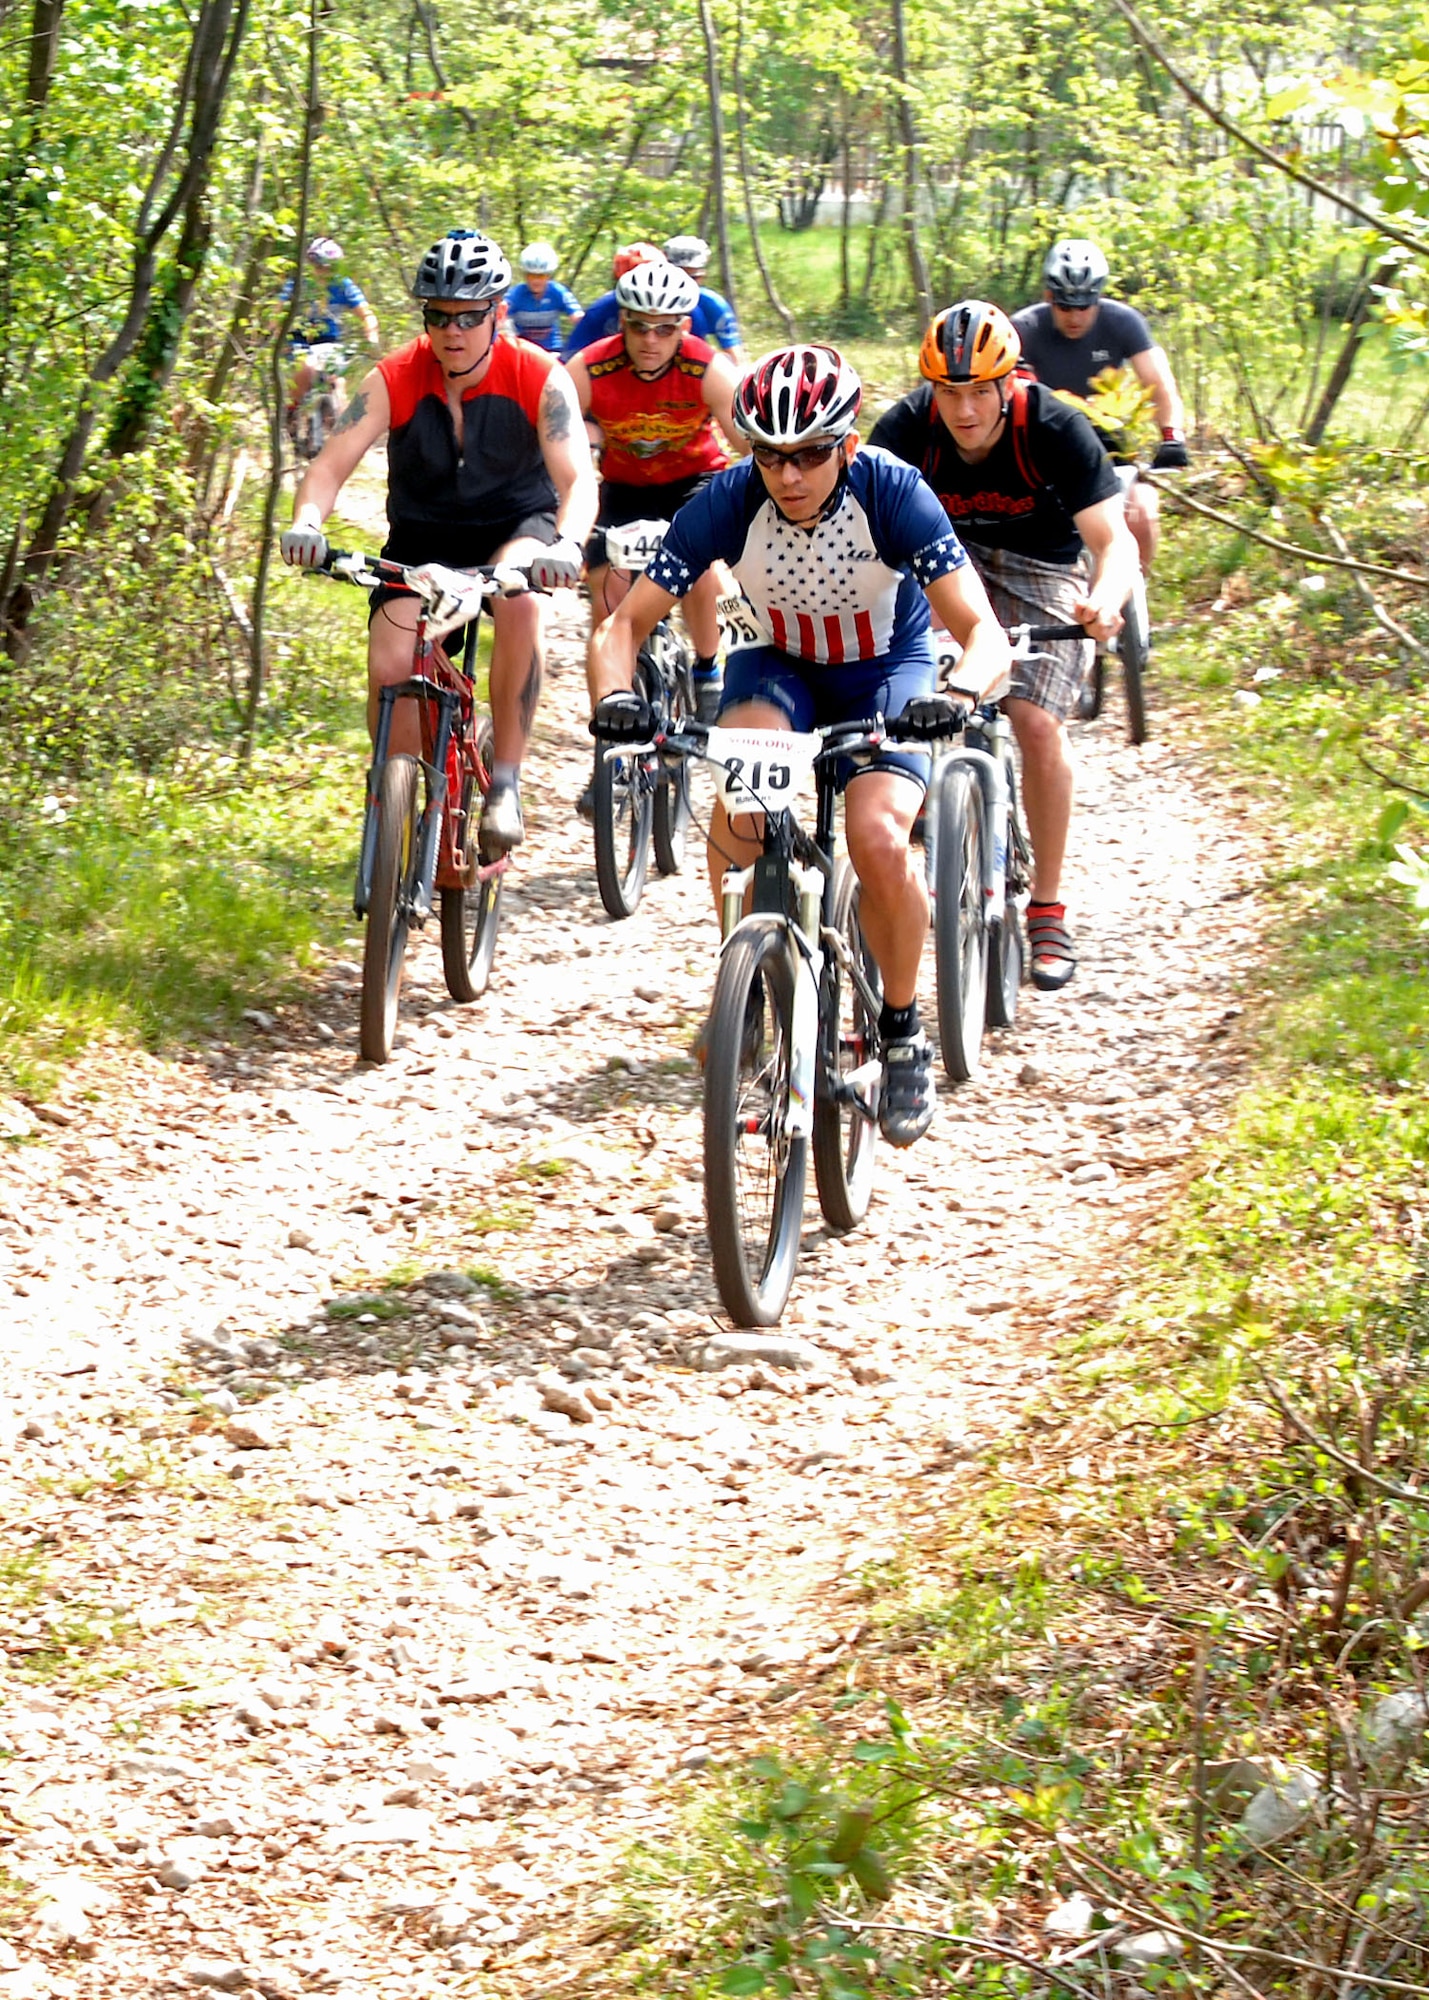 Competitive and novice mountain bikers round the first turn of a 6.25 kilometer loop at Camp Delta located at the base of the Dolomite Mountains near Aviano, Italy on April 18.  Eighteen riders from Germany and Italy took part in the first of 11 events which make up the 2009 U.S. Forces Europe Mountain Bike Series.  The championship race at U.S. Army Garrison in Hohenfels, Germany, Sept. 26 will close out the season.  (U.S. Air Force photo/Tech. Sgt. Michael O'Connor)